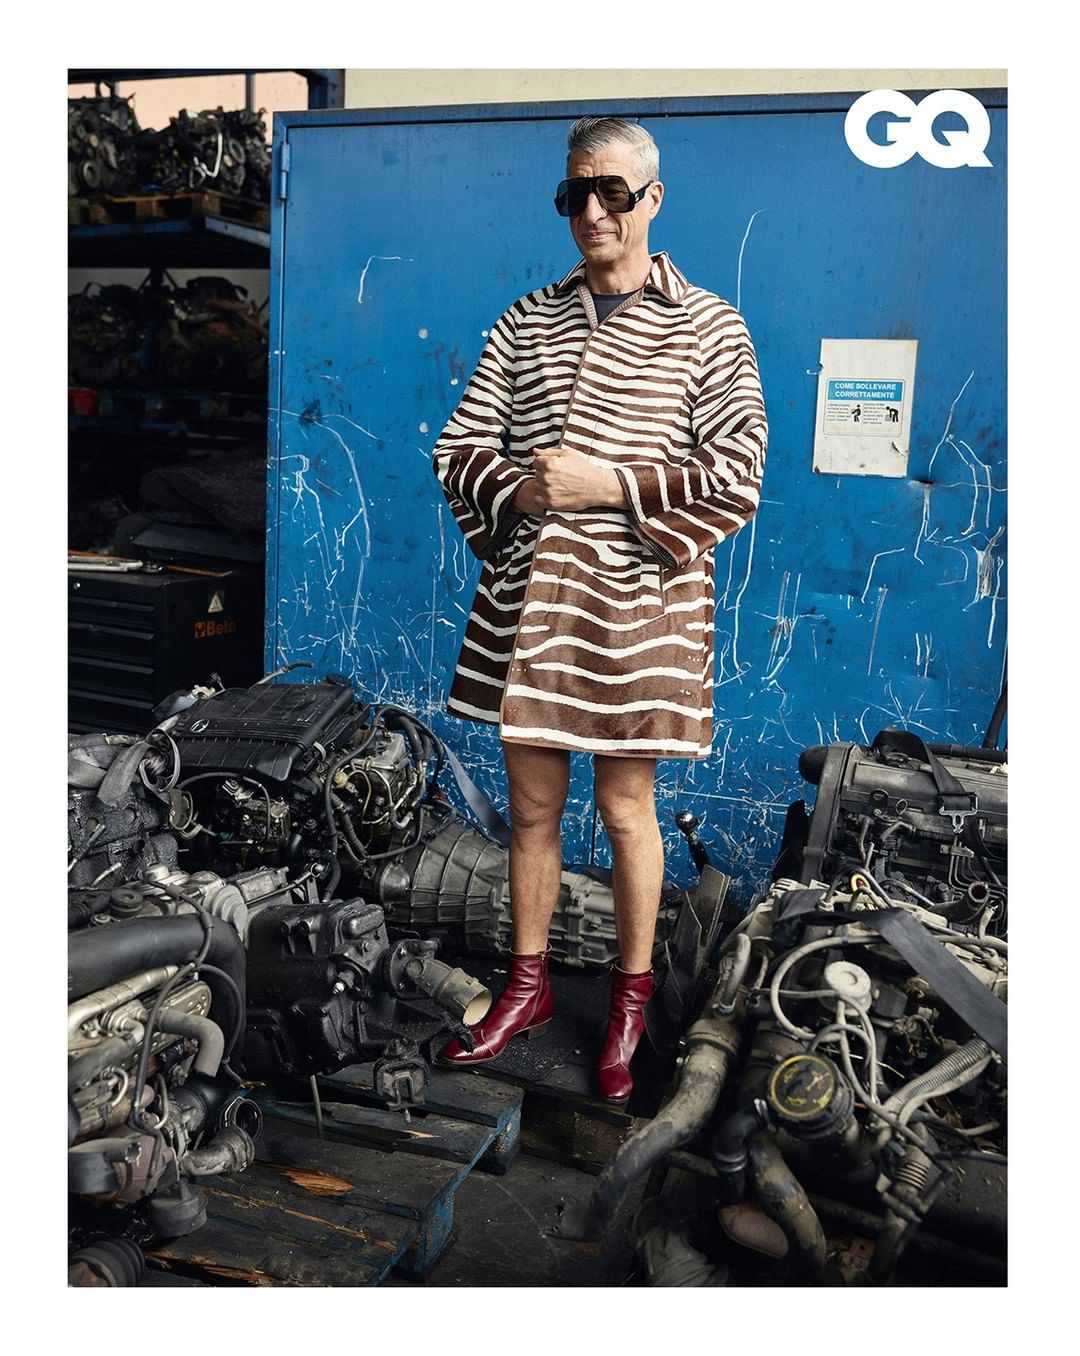 Gucci Official - In @gqitalia’s September issue, @mauriziocattelan wears looks from #GucciPreFall20 by @alessandro_michele including a wool coat and single-breasted suits. Photography by @danielrierao...